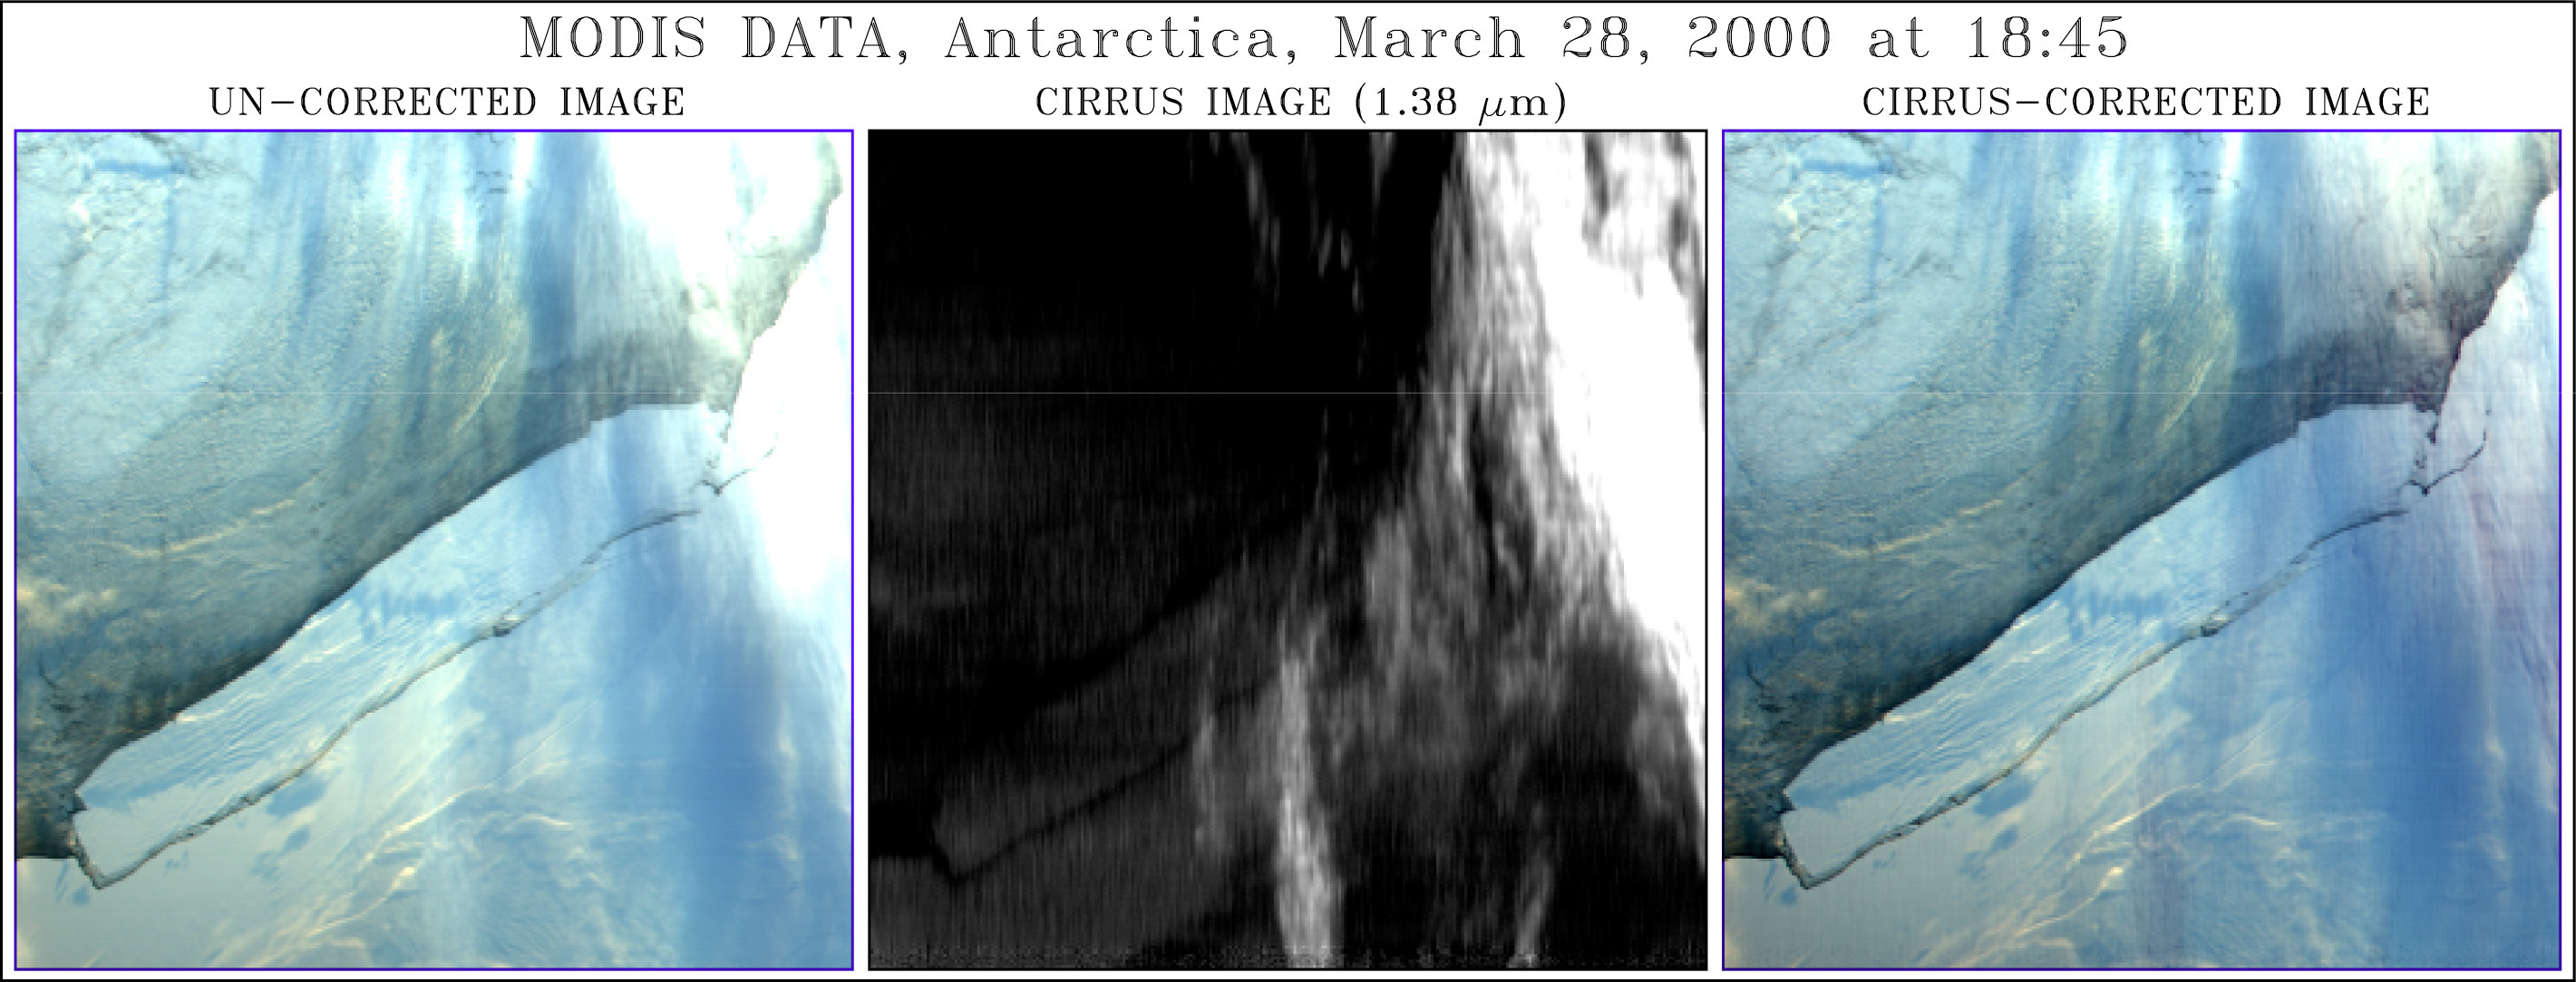 Thin Cirrus Cloud over the Ross Ice Shelf, Antarctica - related image preview